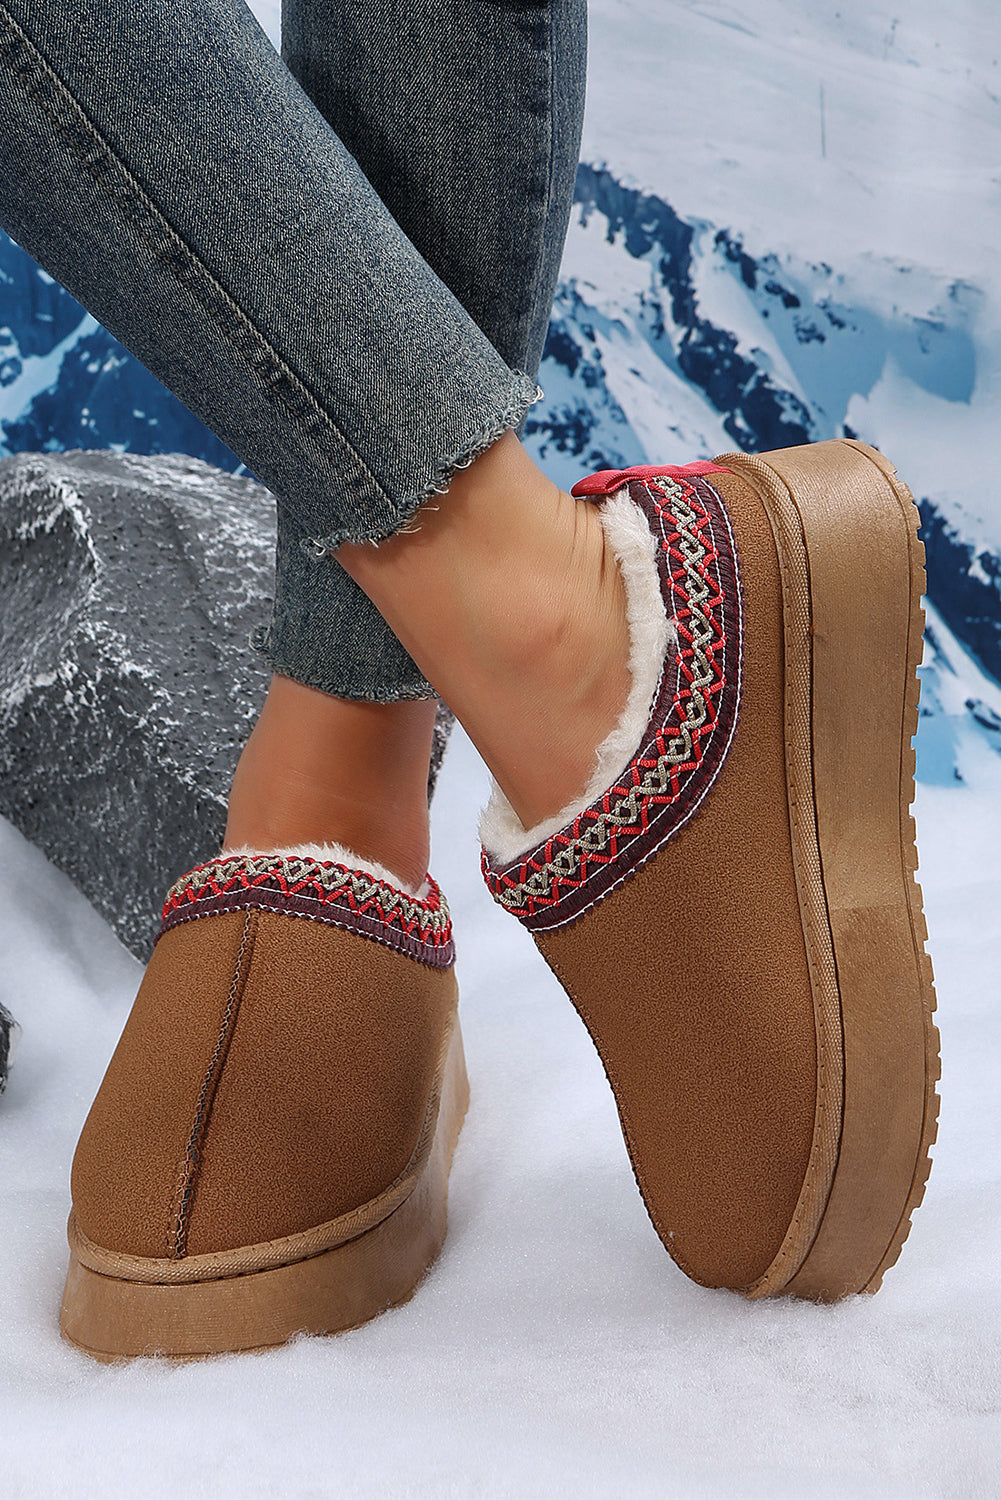 Chestnut Suede Slip on Shoes - The Lakeside Boutique